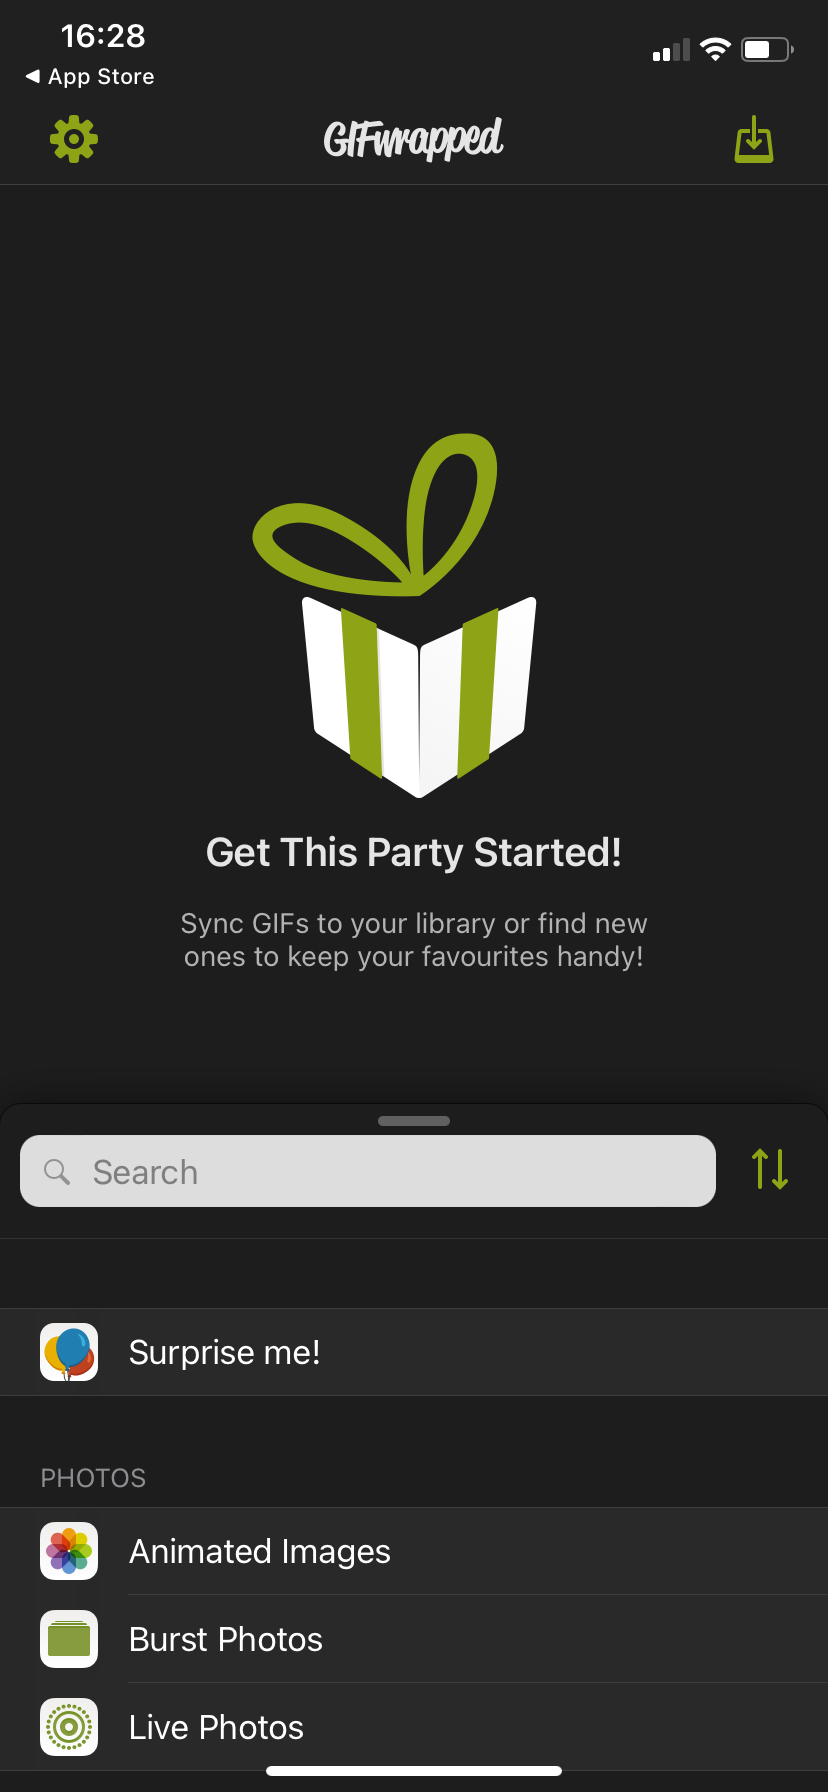 download GIF with GIFwrapped